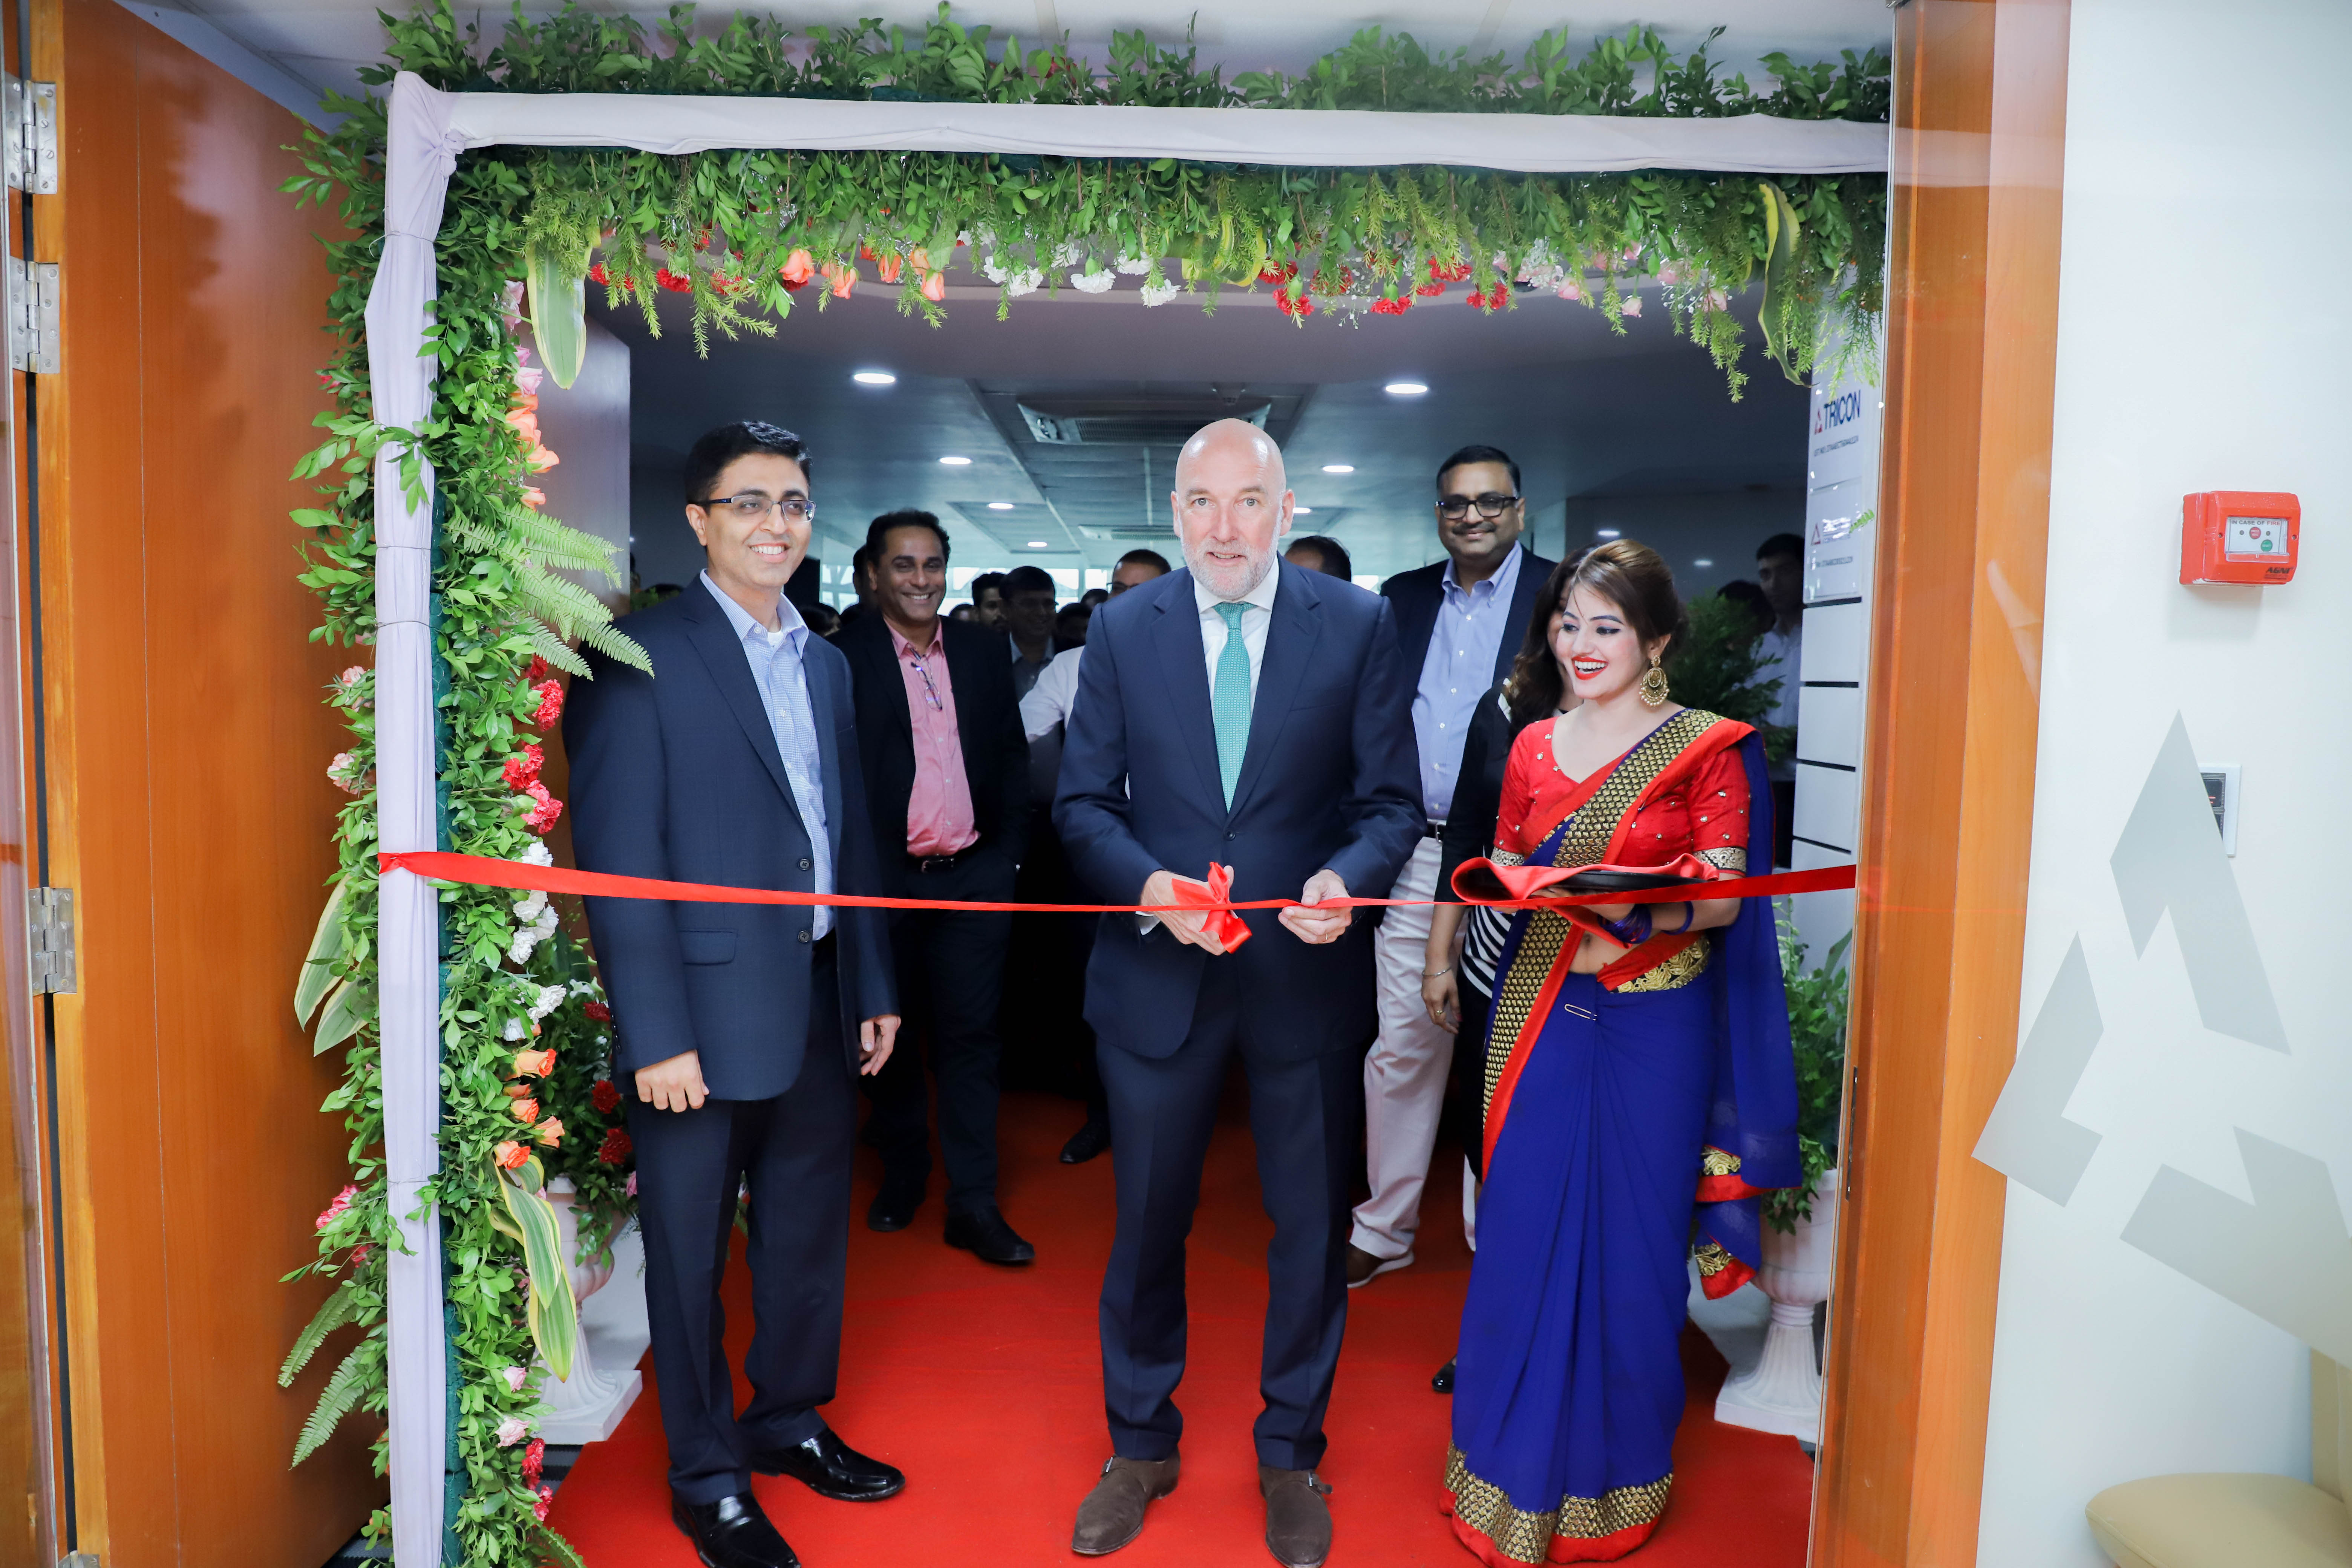 Opening ceremony for Tricon new India office